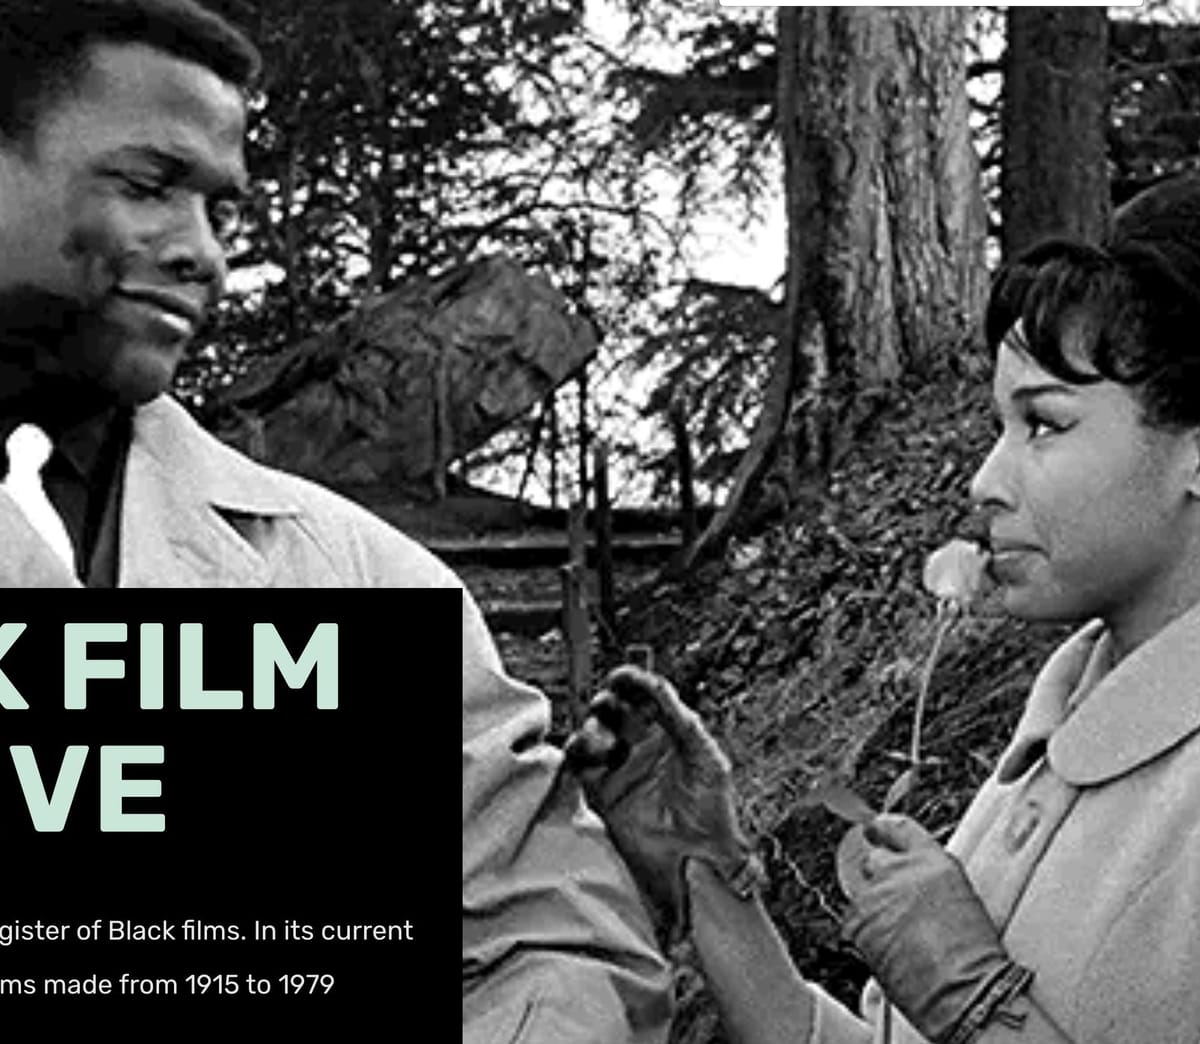 Site of the Day: The Black Film Archive